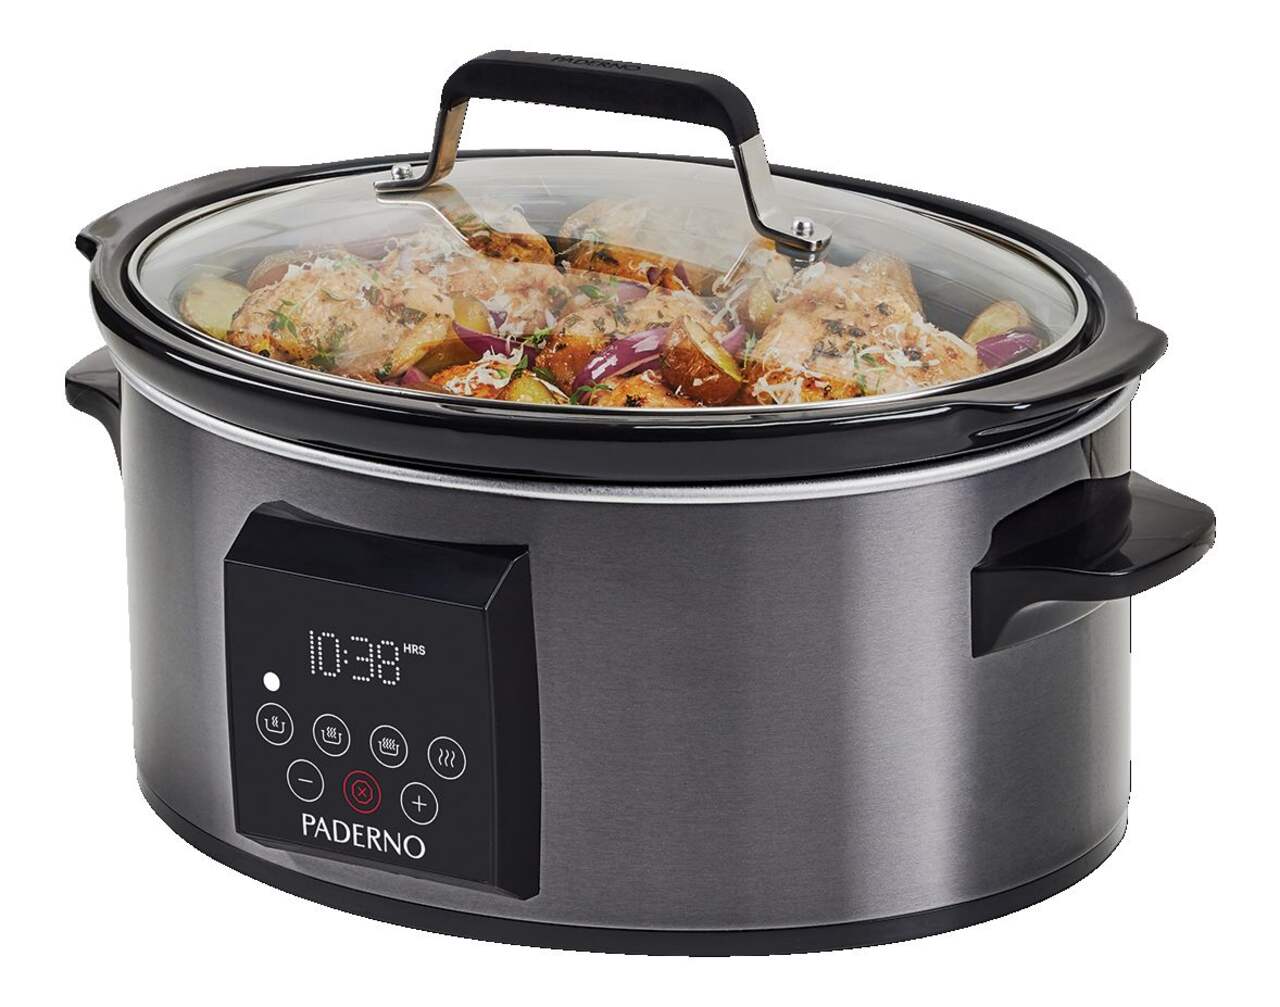 https://media-www.canadiantire.ca/product/living/kitchen/kitchen-appliances/0435265/paderno-6-qt-programmable-slow-cooker-black-stainless-steel-ae6ffa2e-7edd-4e3e-b233-2abe8cff7344-jpgrendition.jpg?imdensity=1&imwidth=640&impolicy=mZoom